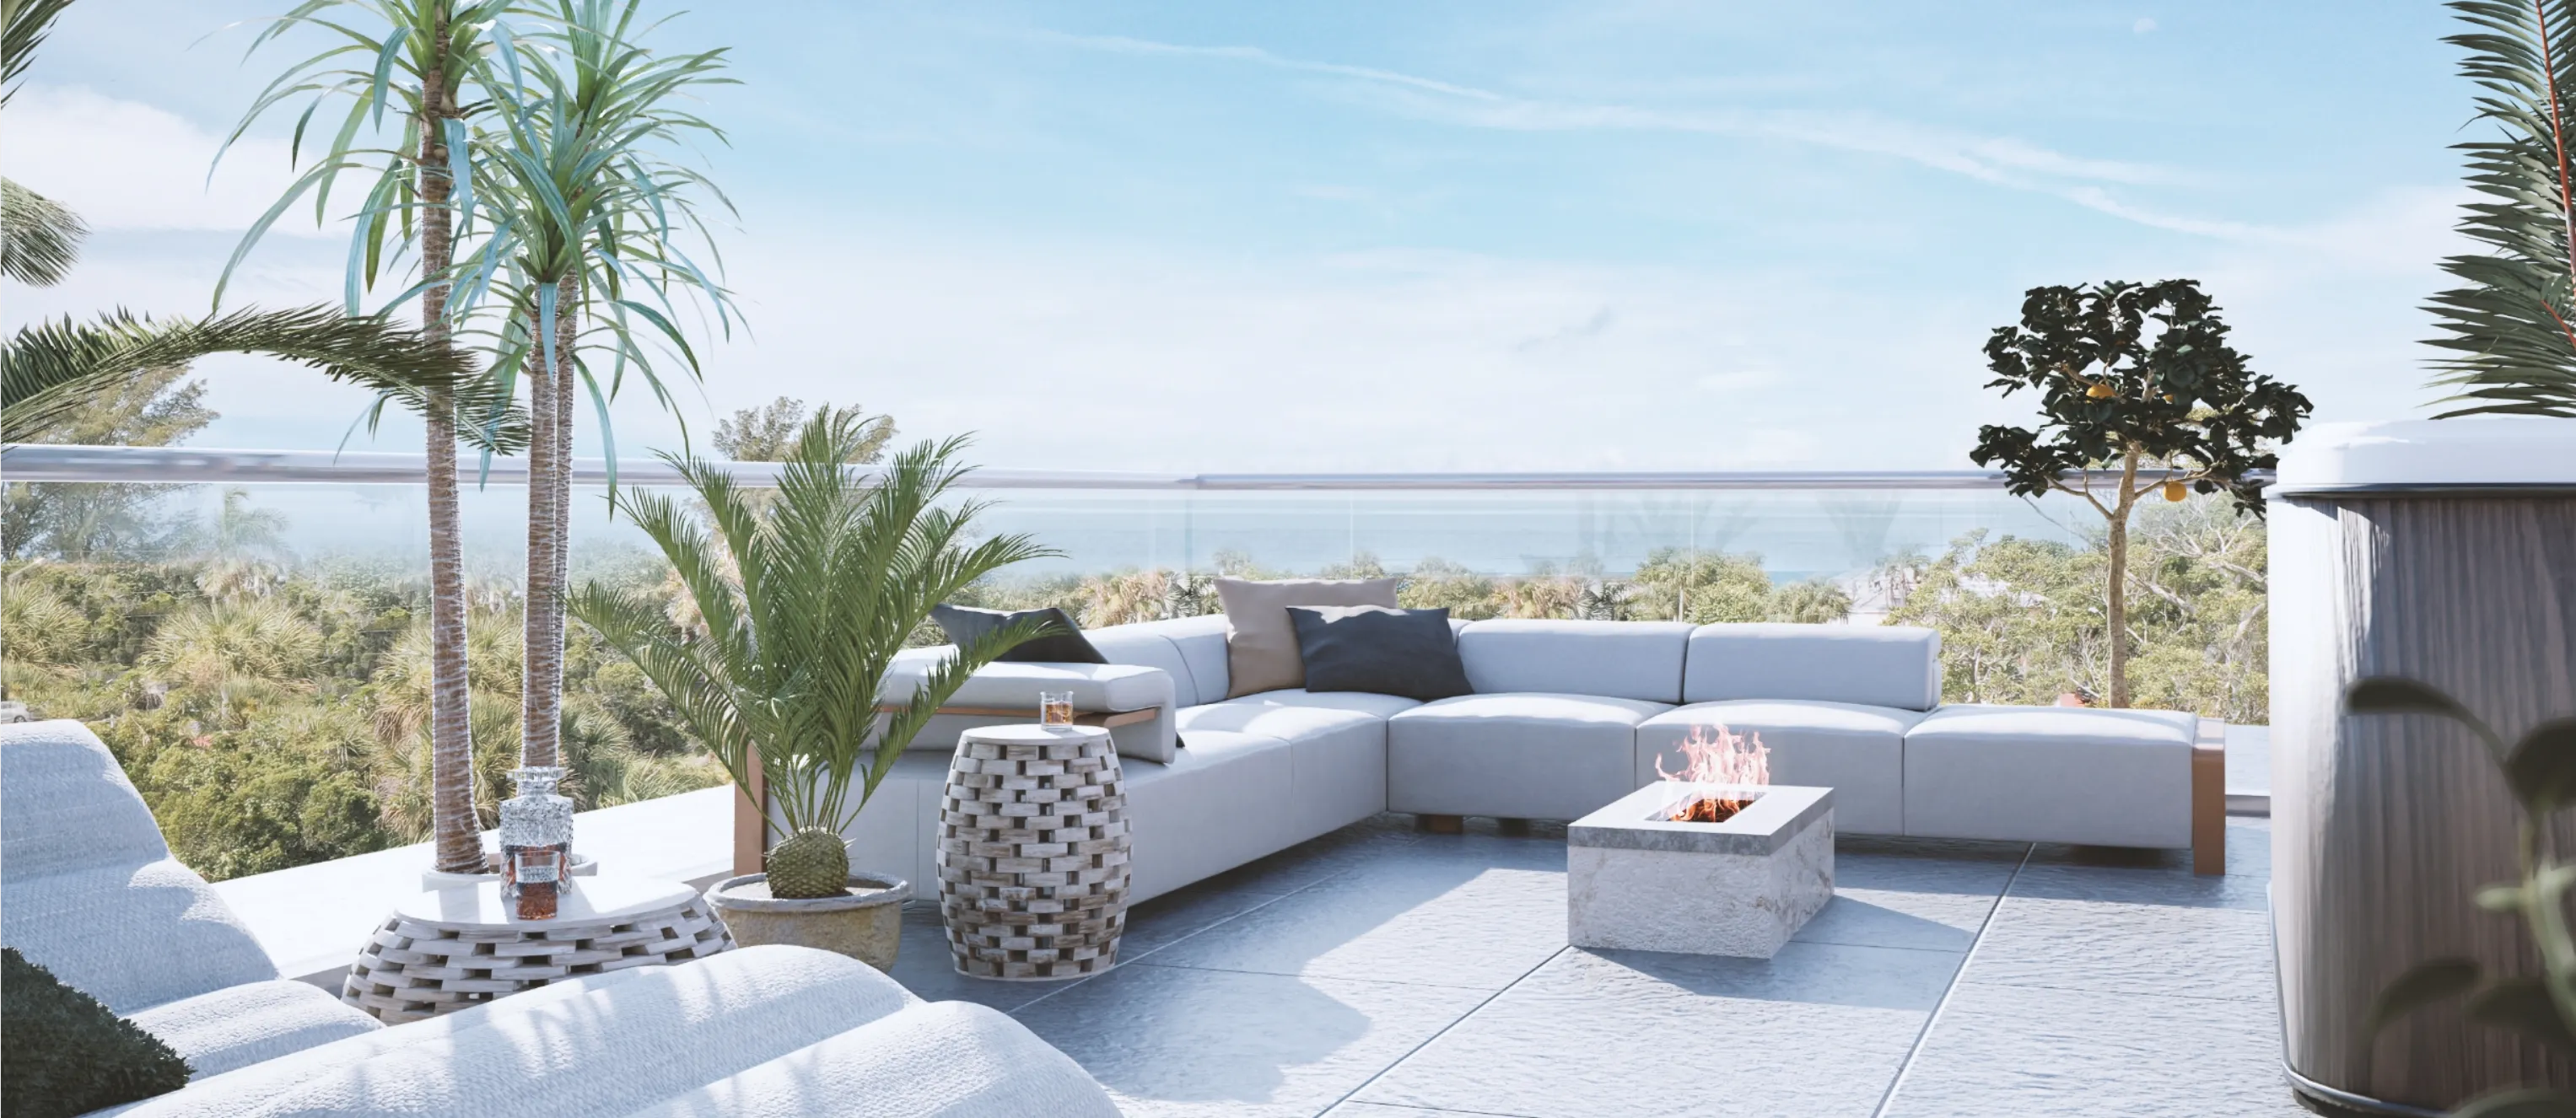 A 3D rendering of a rooftop terrace with a fire pit and a view of the ocean. The terrace is furnished with a comfortable seating area, a dining table, and several potted plants.